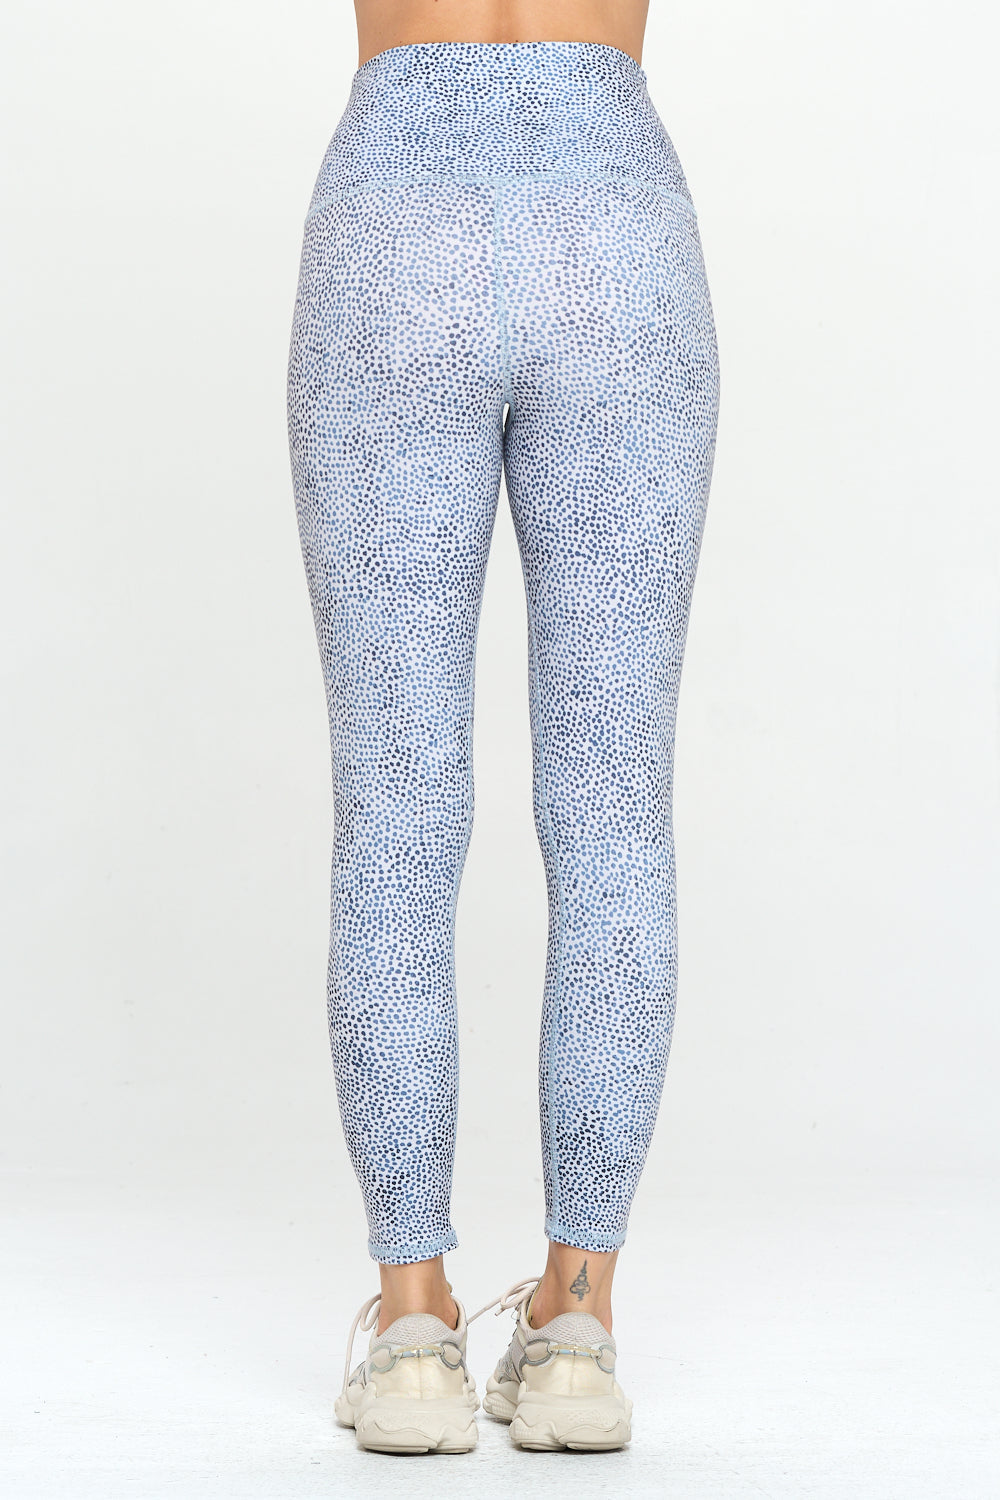 Mia - Off White Animal Spots 7/8 Legging (High-Waist) - LIMITED EDITION by EVCR